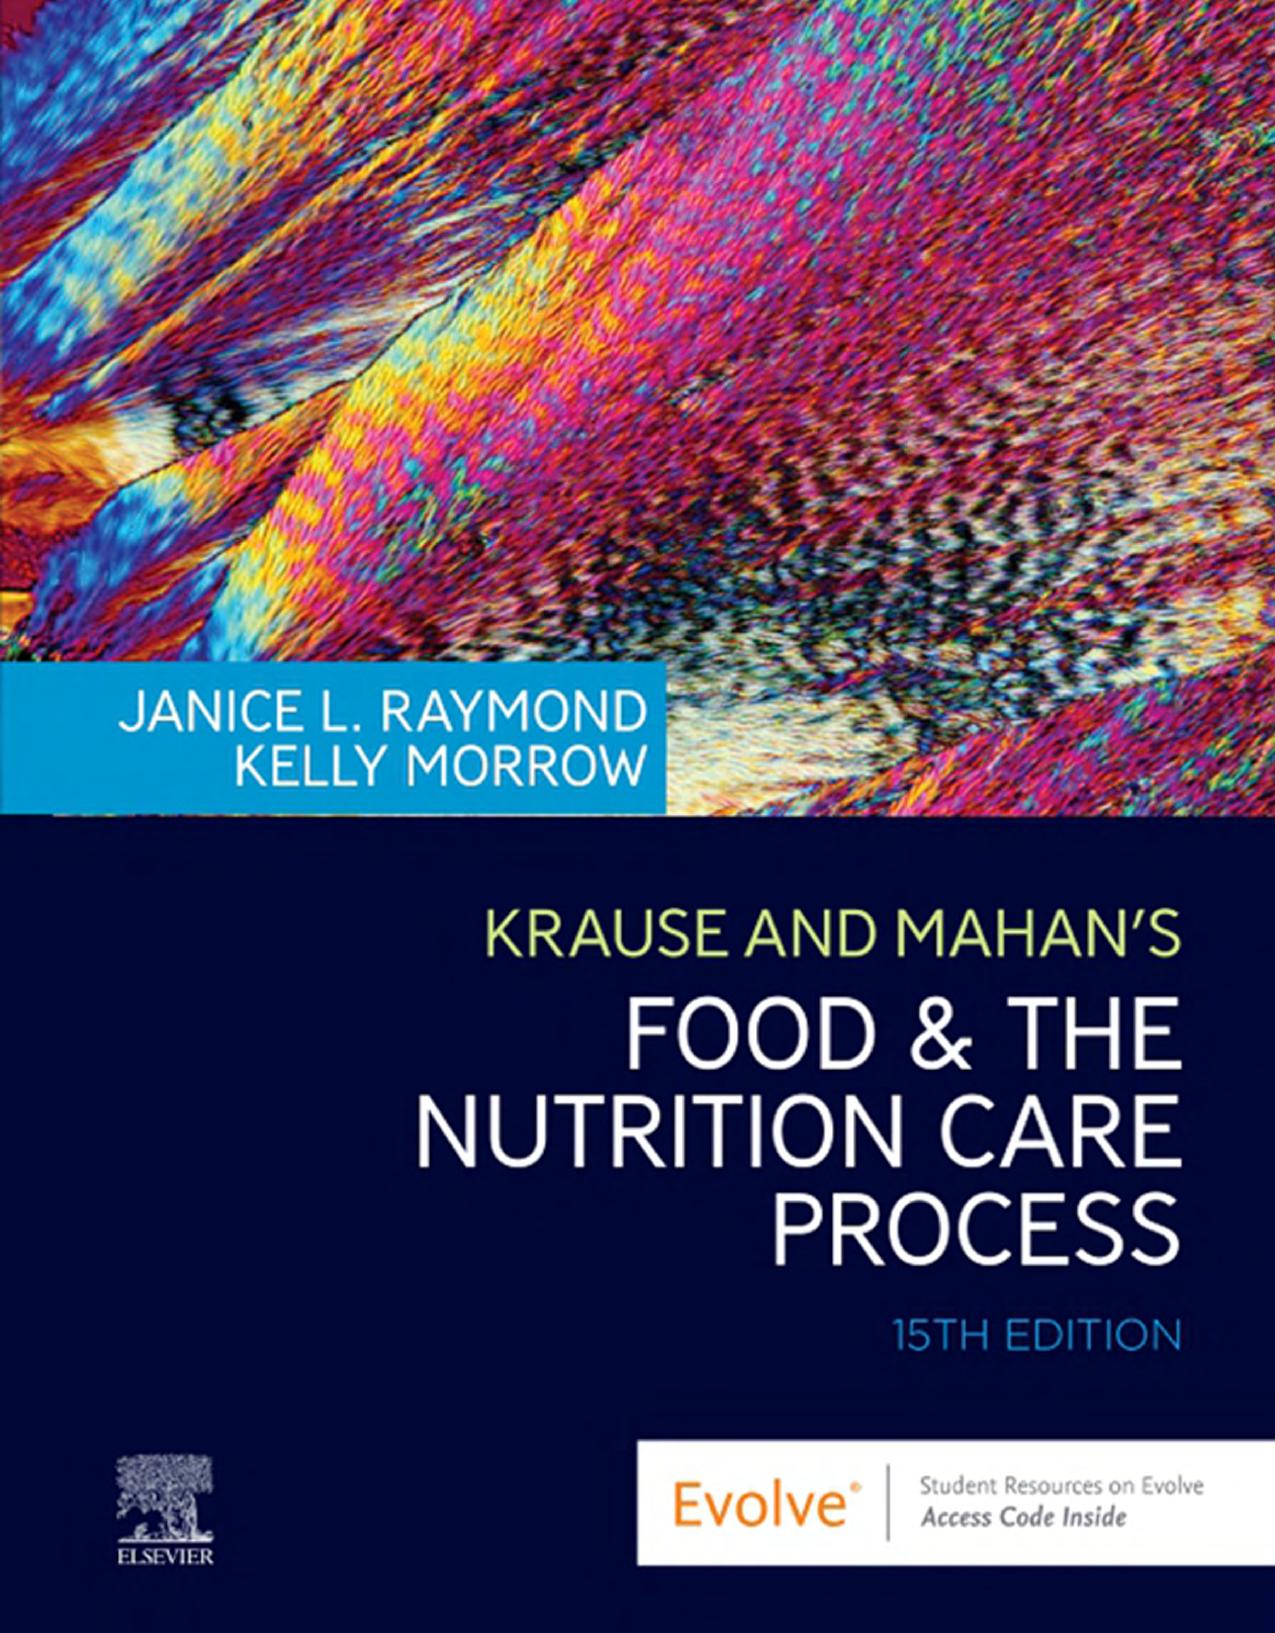 Krause and Mahan s Food  and  the Nutrition Care Process E-Book 15th Edition by Janice L Raymond  , Kelly Morrow